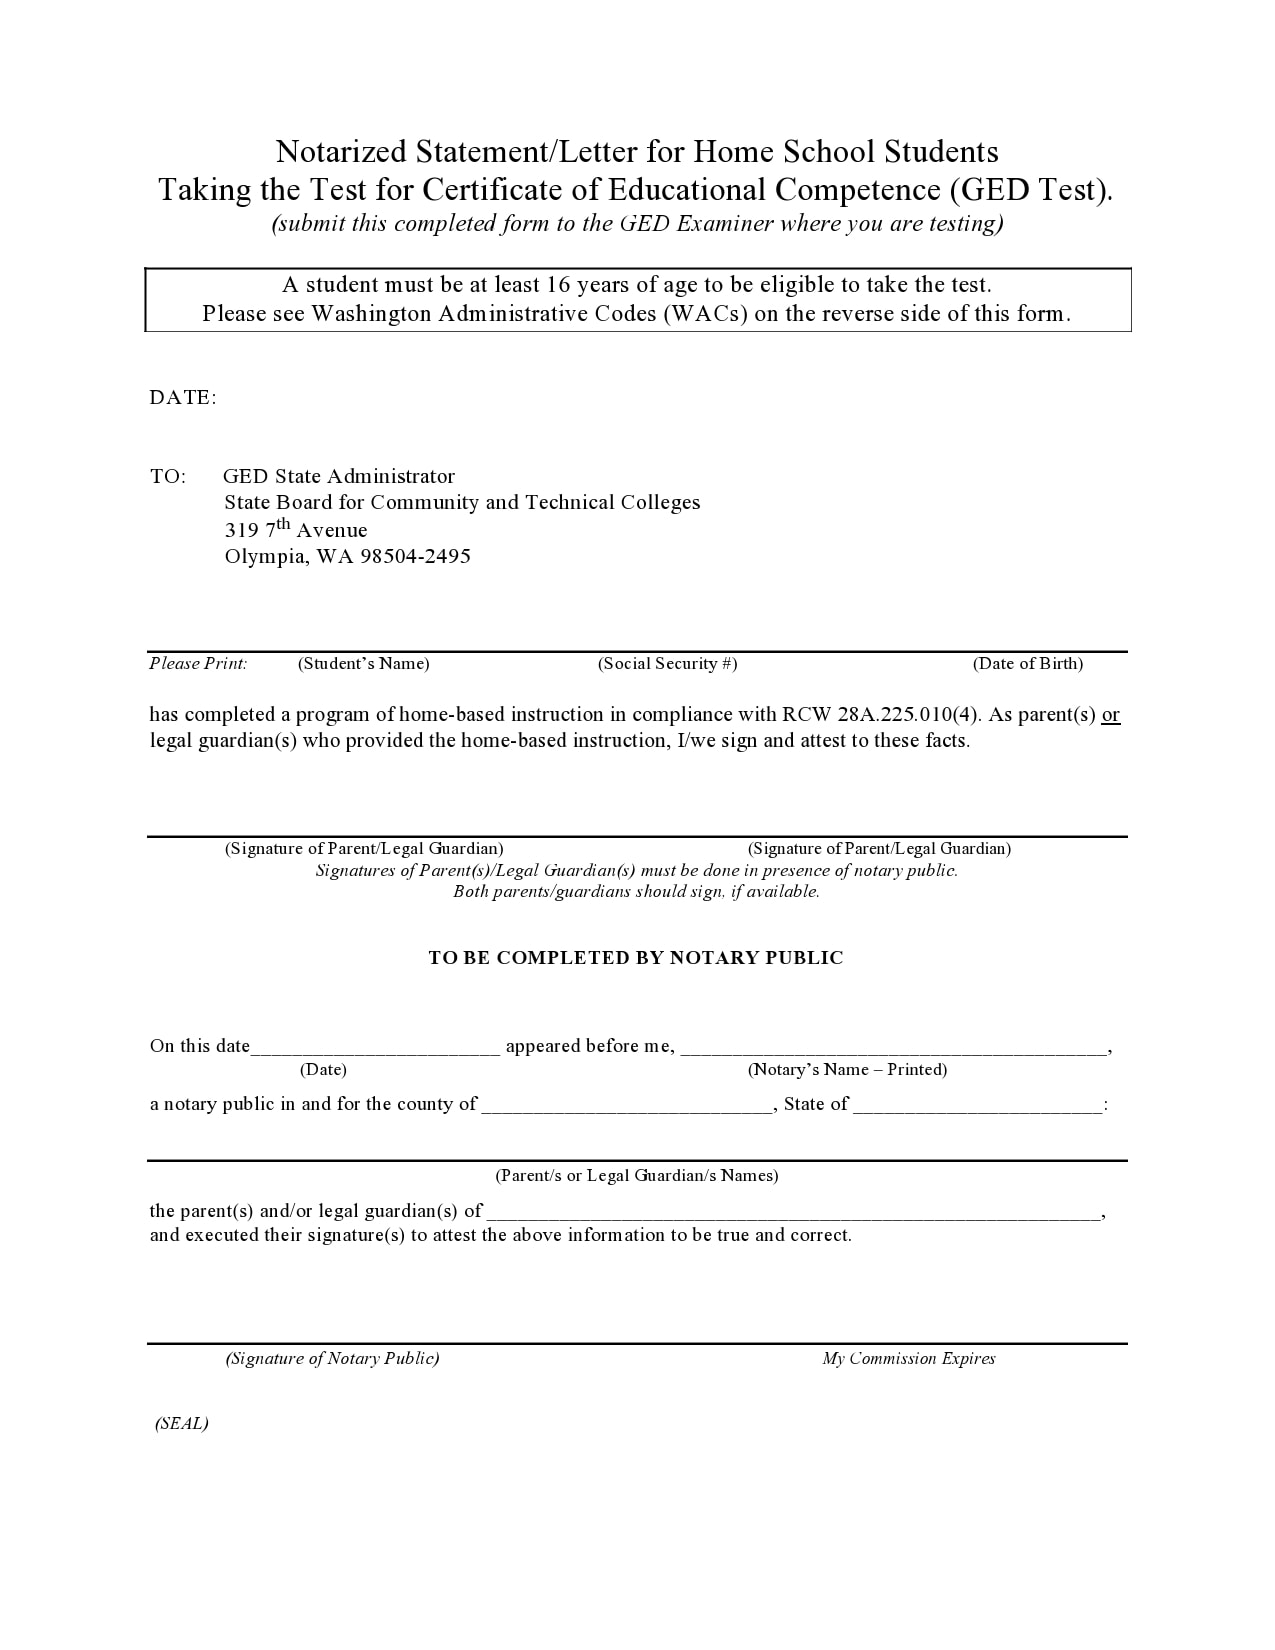 notarized letter template texas